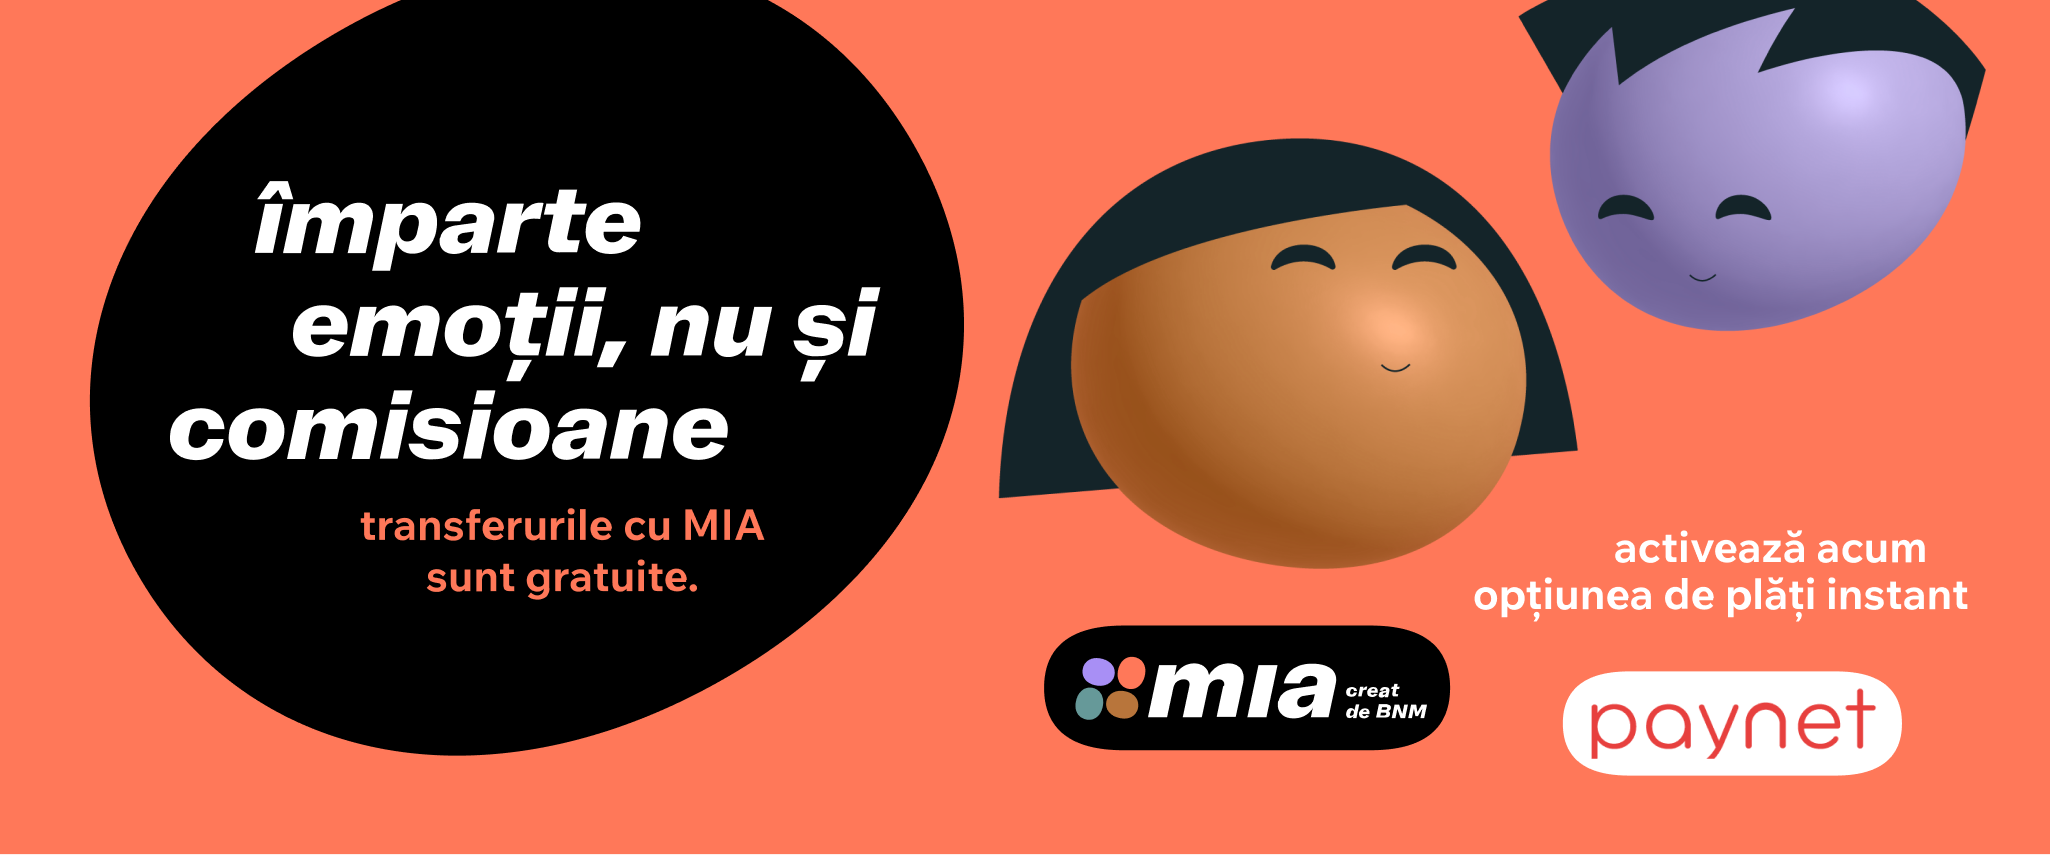 MIA Instant Payments enables fast and secure money transfers between all financial accounts in the Republic of Moldova, with no fees, using only the beneficiary's phone number.

